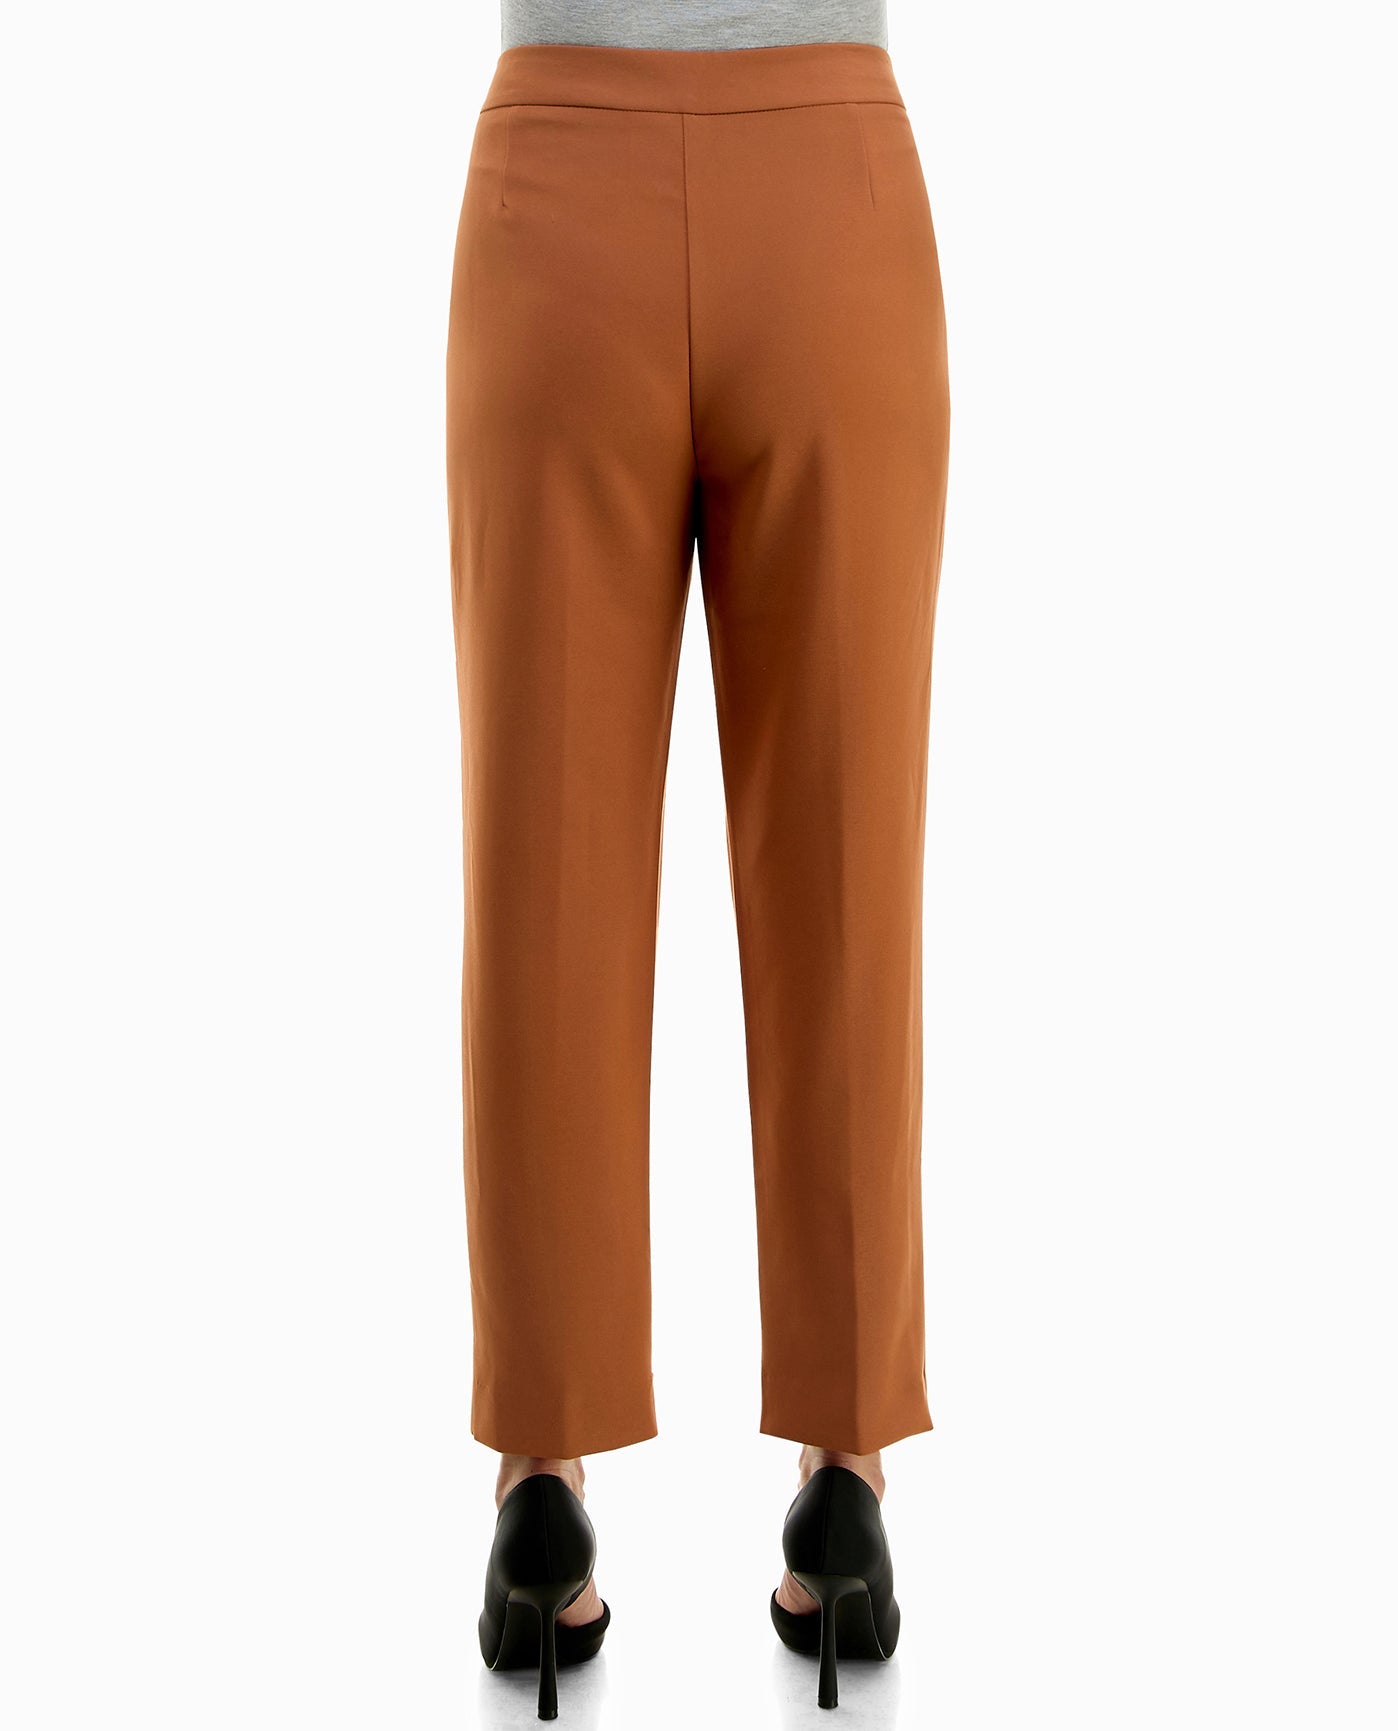 Nicole Crepe Ankle Grazer Trouser 27 inch various colours & sizes